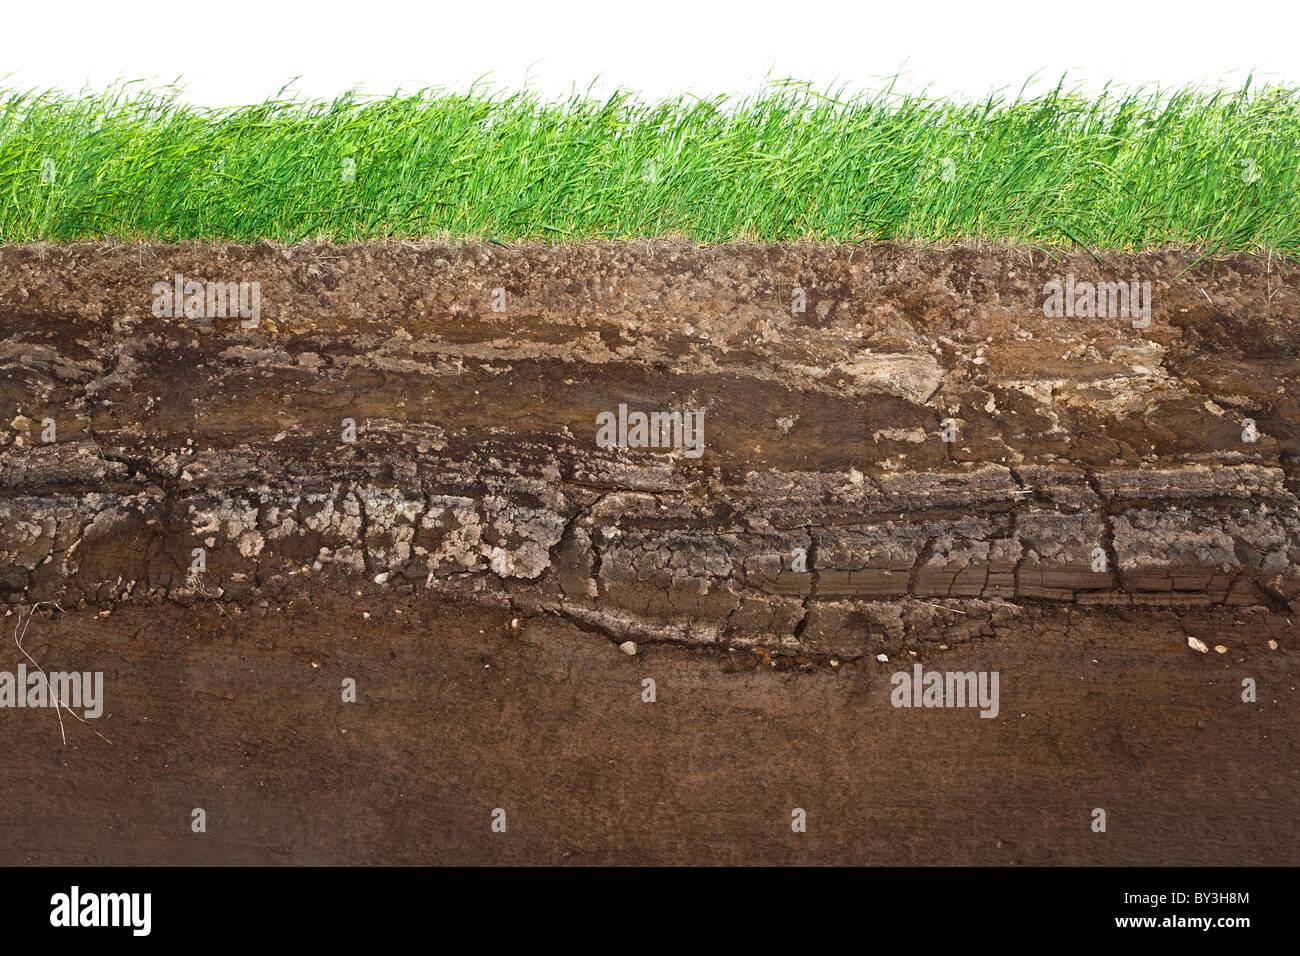 Cross section of green grass and underground soil layers beneath Stock Photo